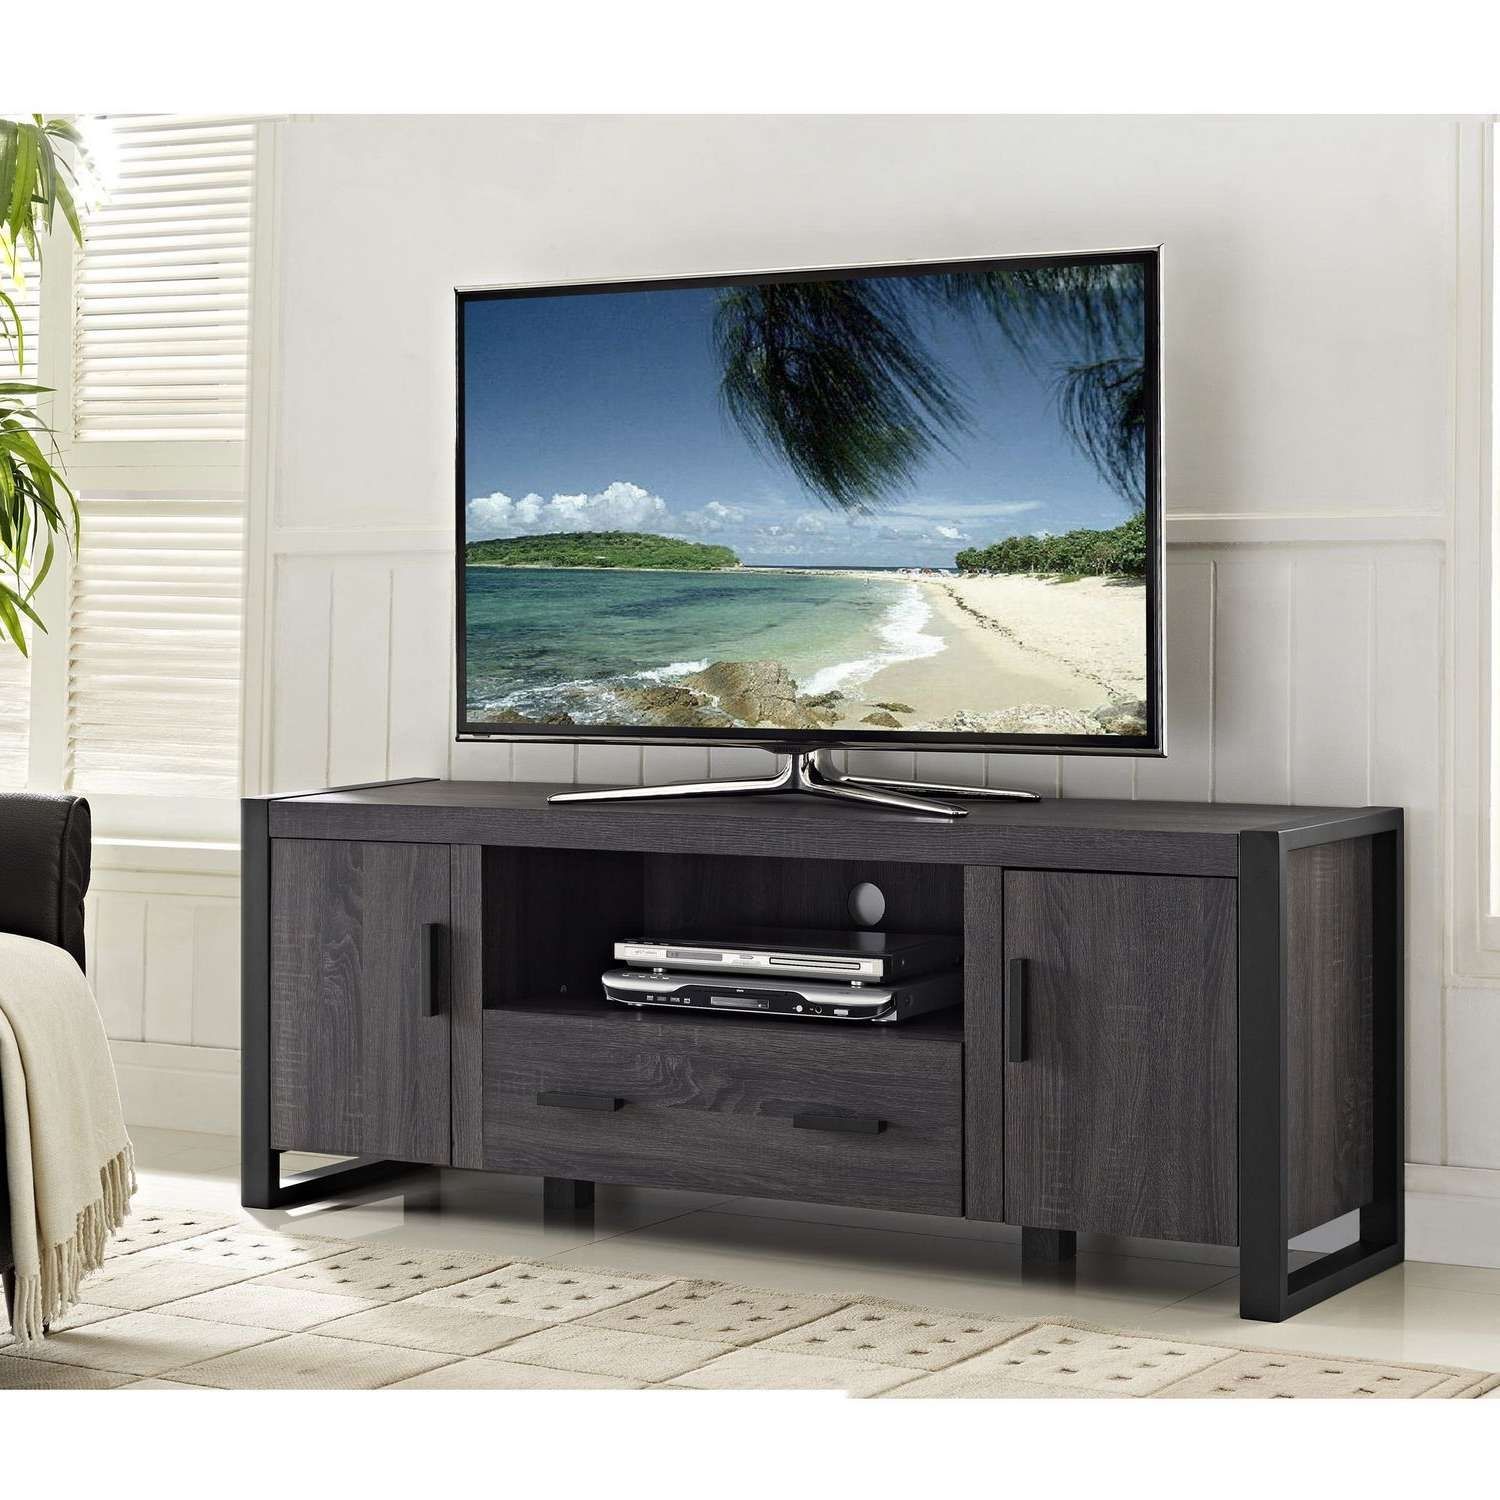 We Furniture 60" Grey Wood Tv Stand Console | Walmart Canada Throughout Wooden Tv Stands (Gallery 14 of 15)